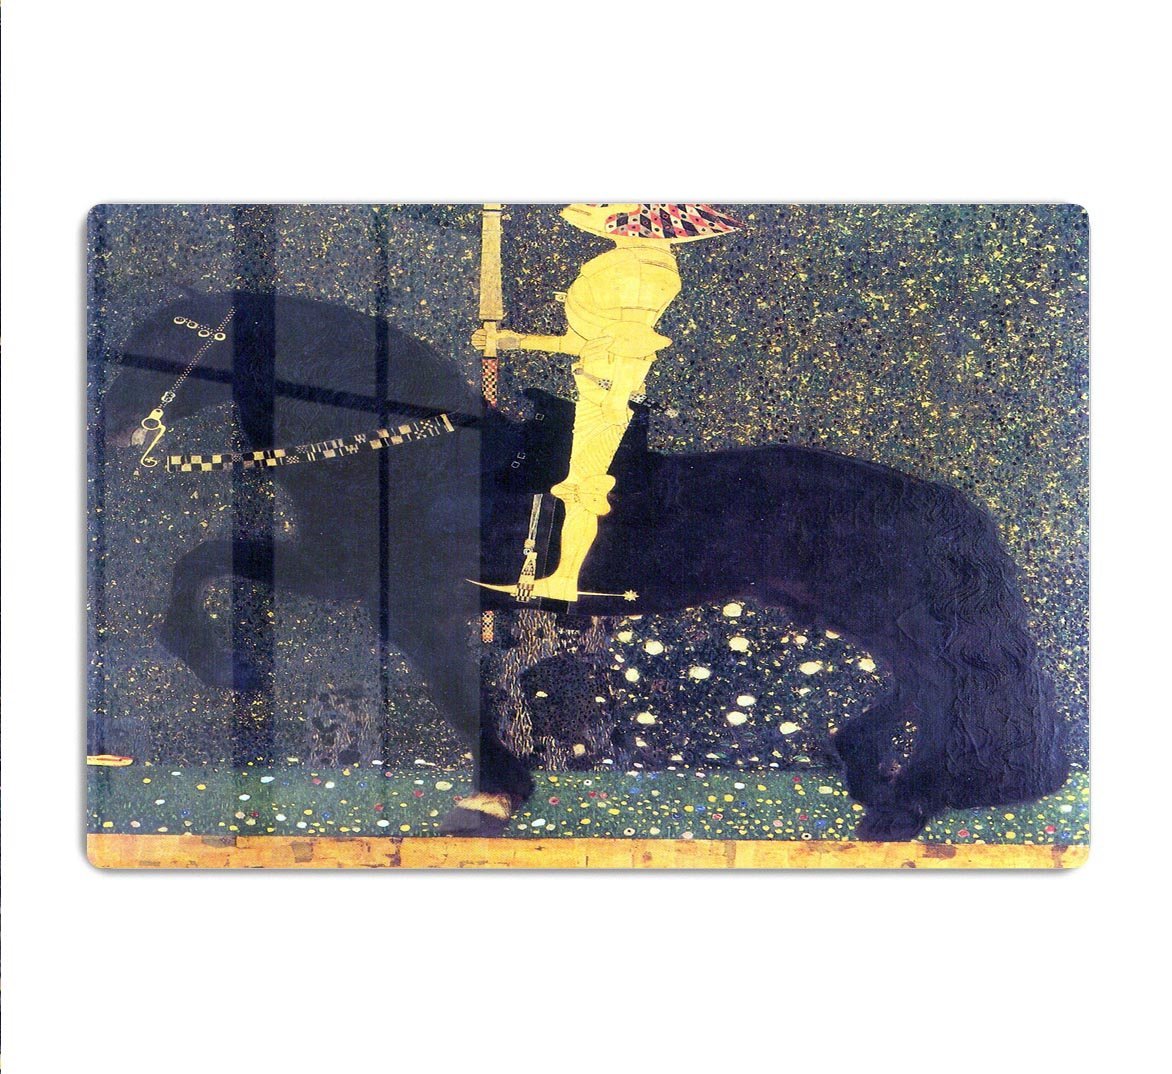 The life of a struggle The Golden Knights by Klimt HD Metal Print